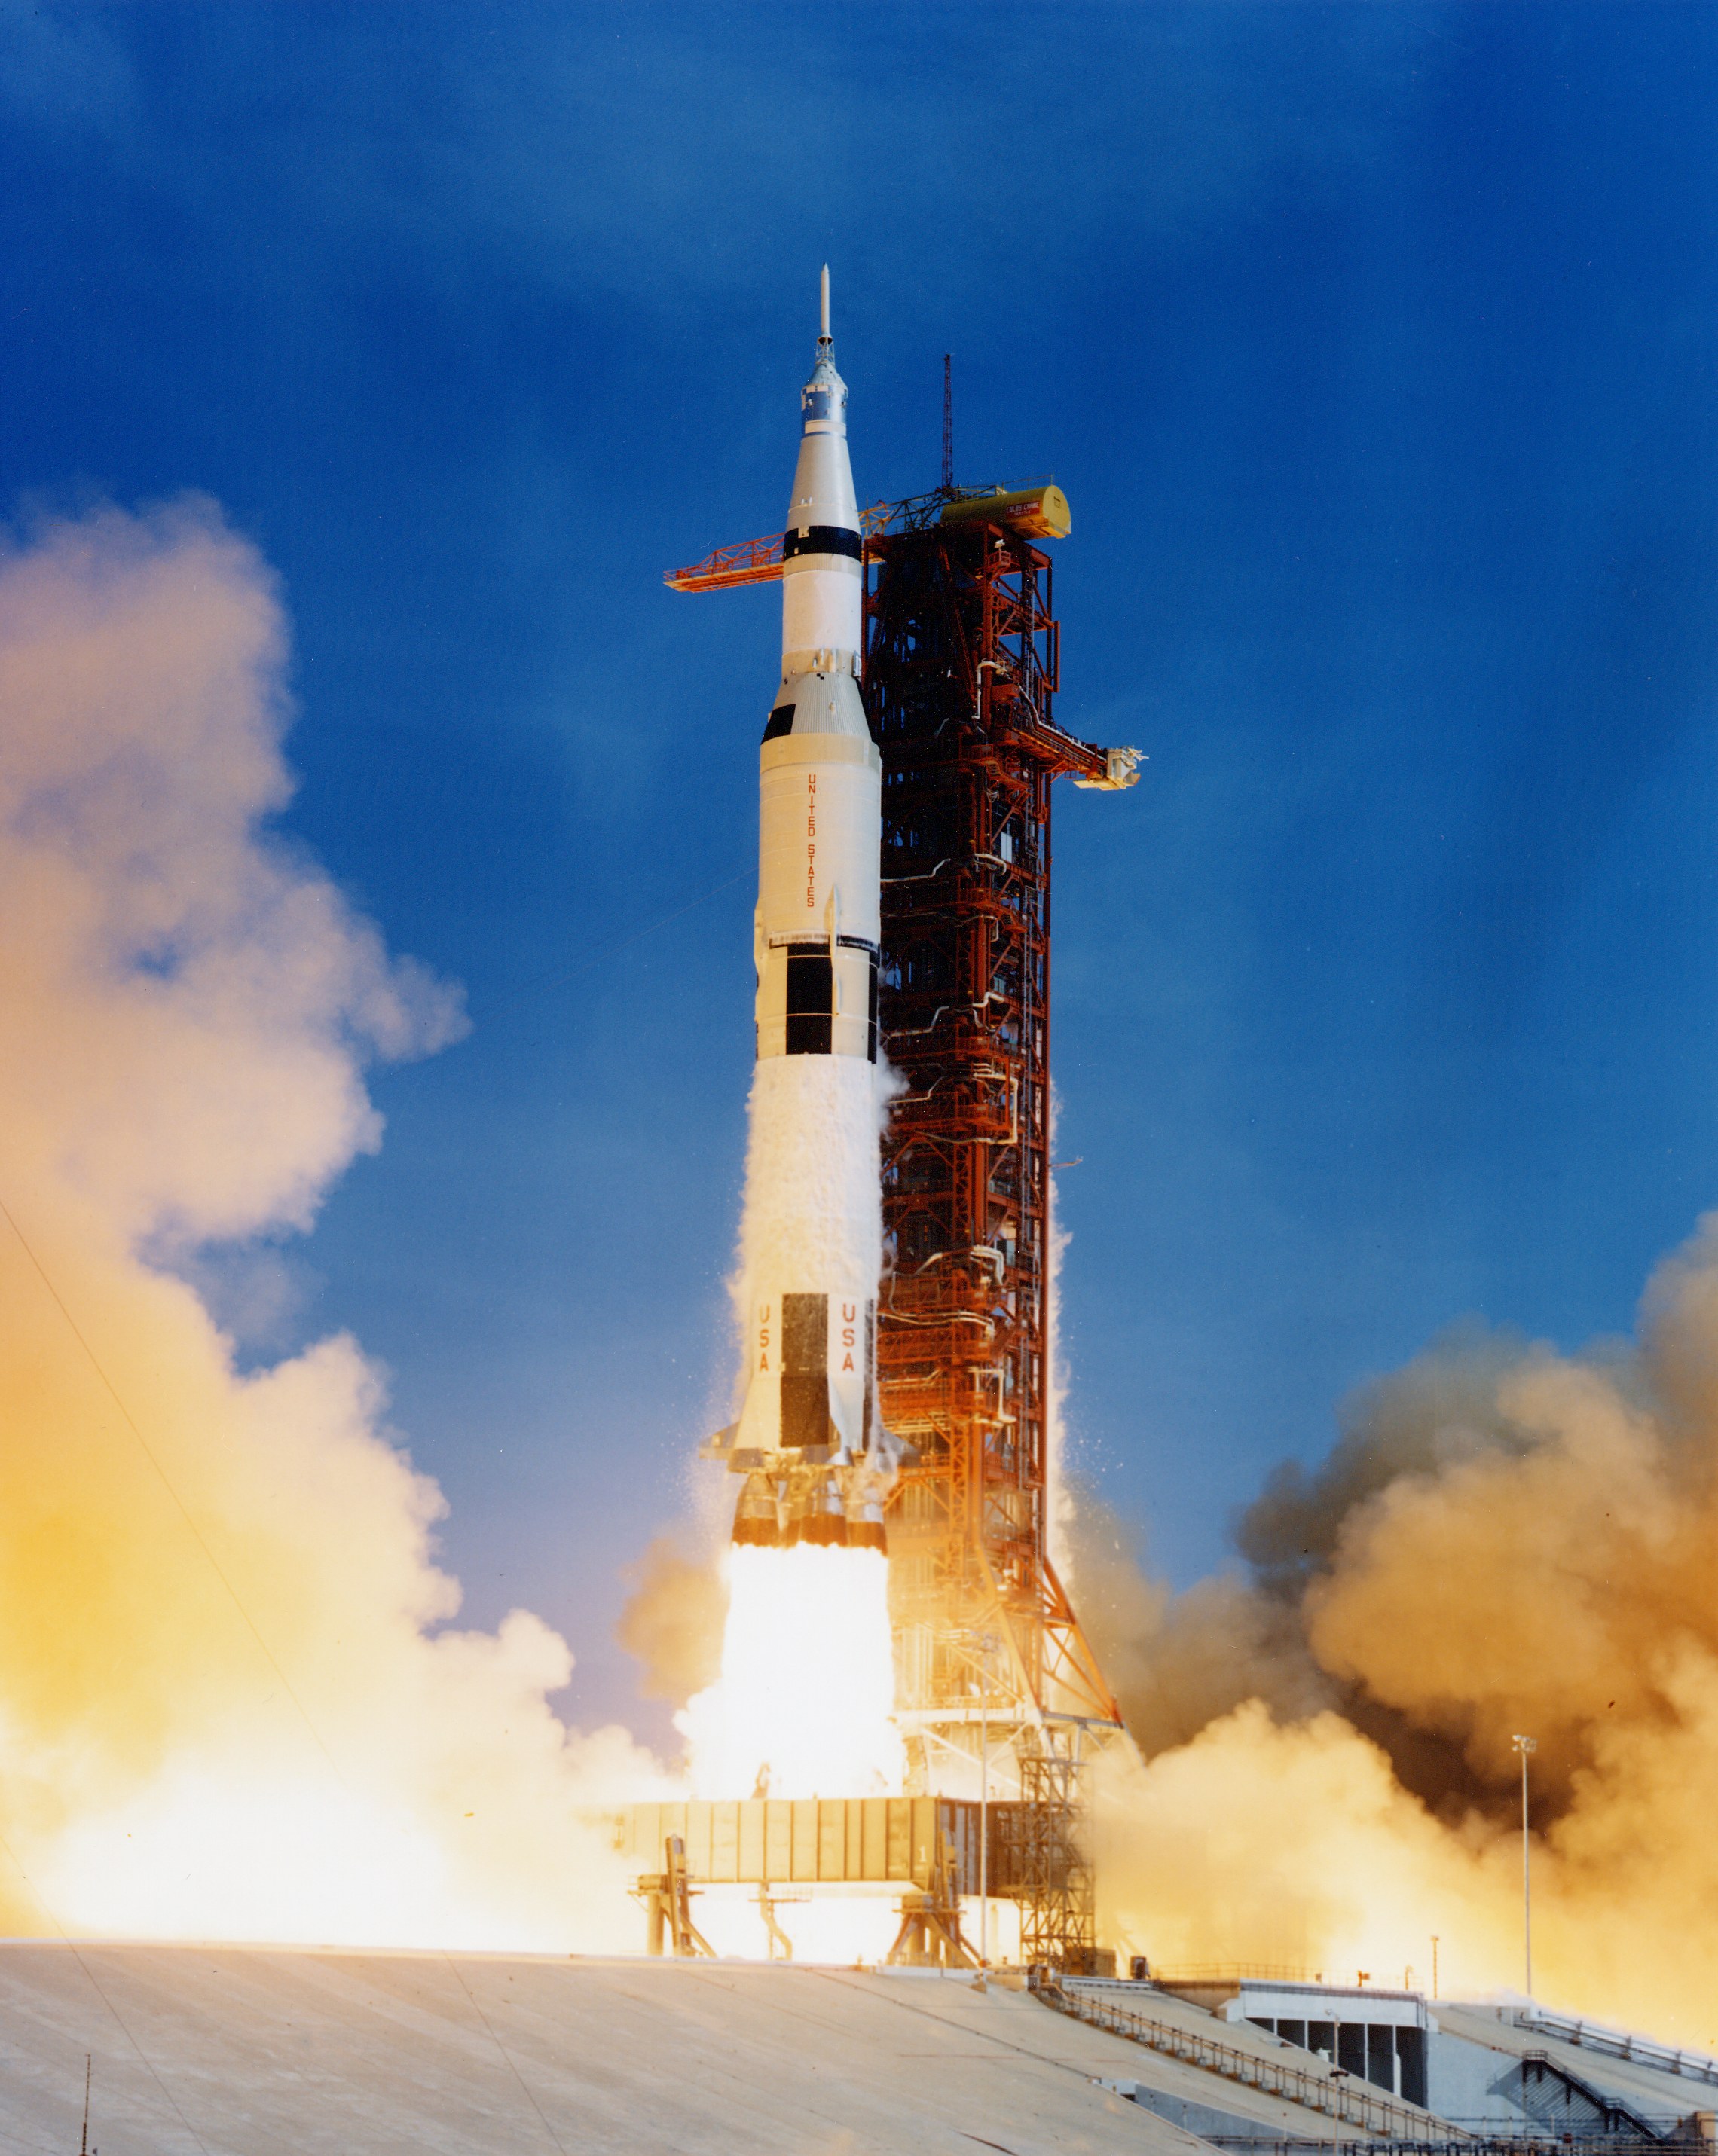 https://upload.wikimedia.org/wikipedia/commons/7/7d/Apollo_11_Saturn_V_lifting_off_on_July_16%2C_1969.jpg